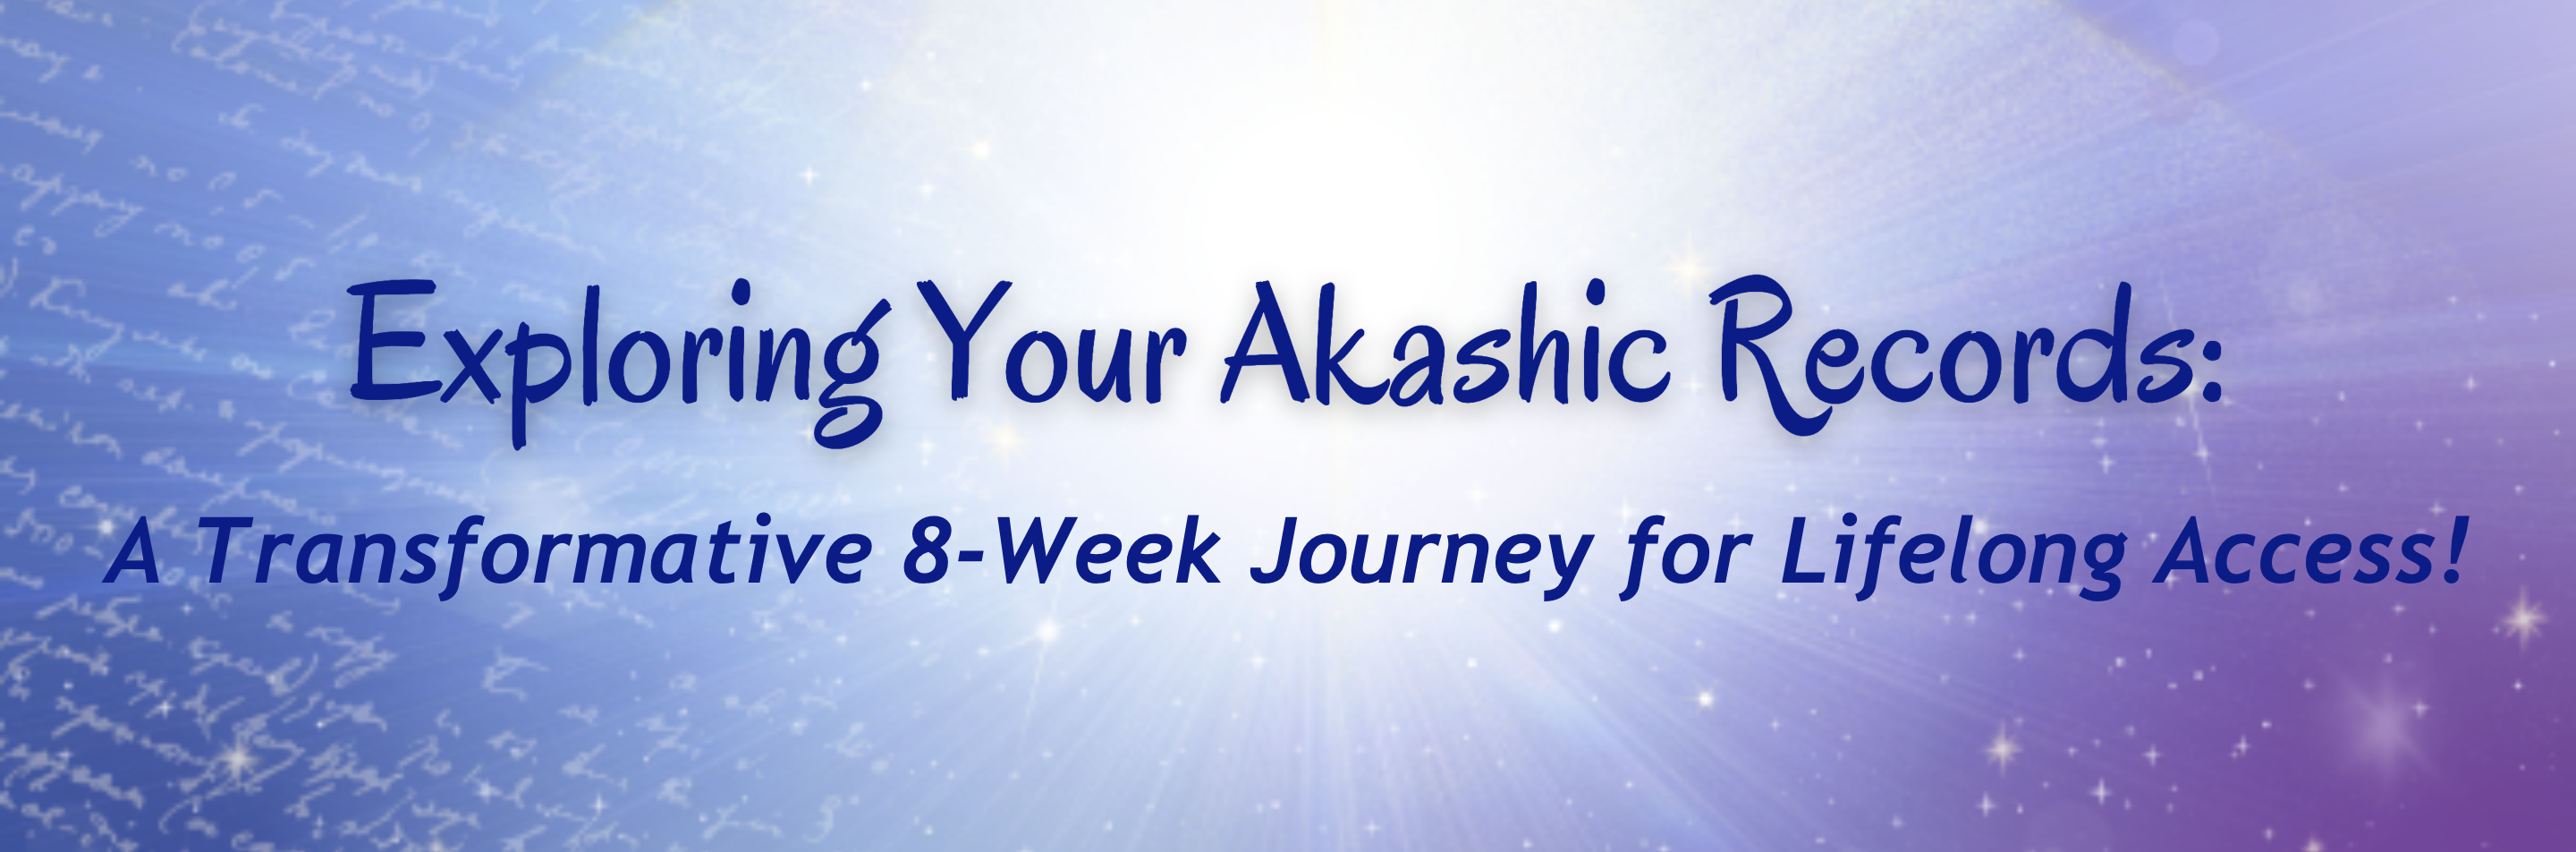 A banner with this text: "Exploring Your Akashic Records: A Transformative 8-Week Journey for Lifelong Access!" with a centered star burst and blue background. 